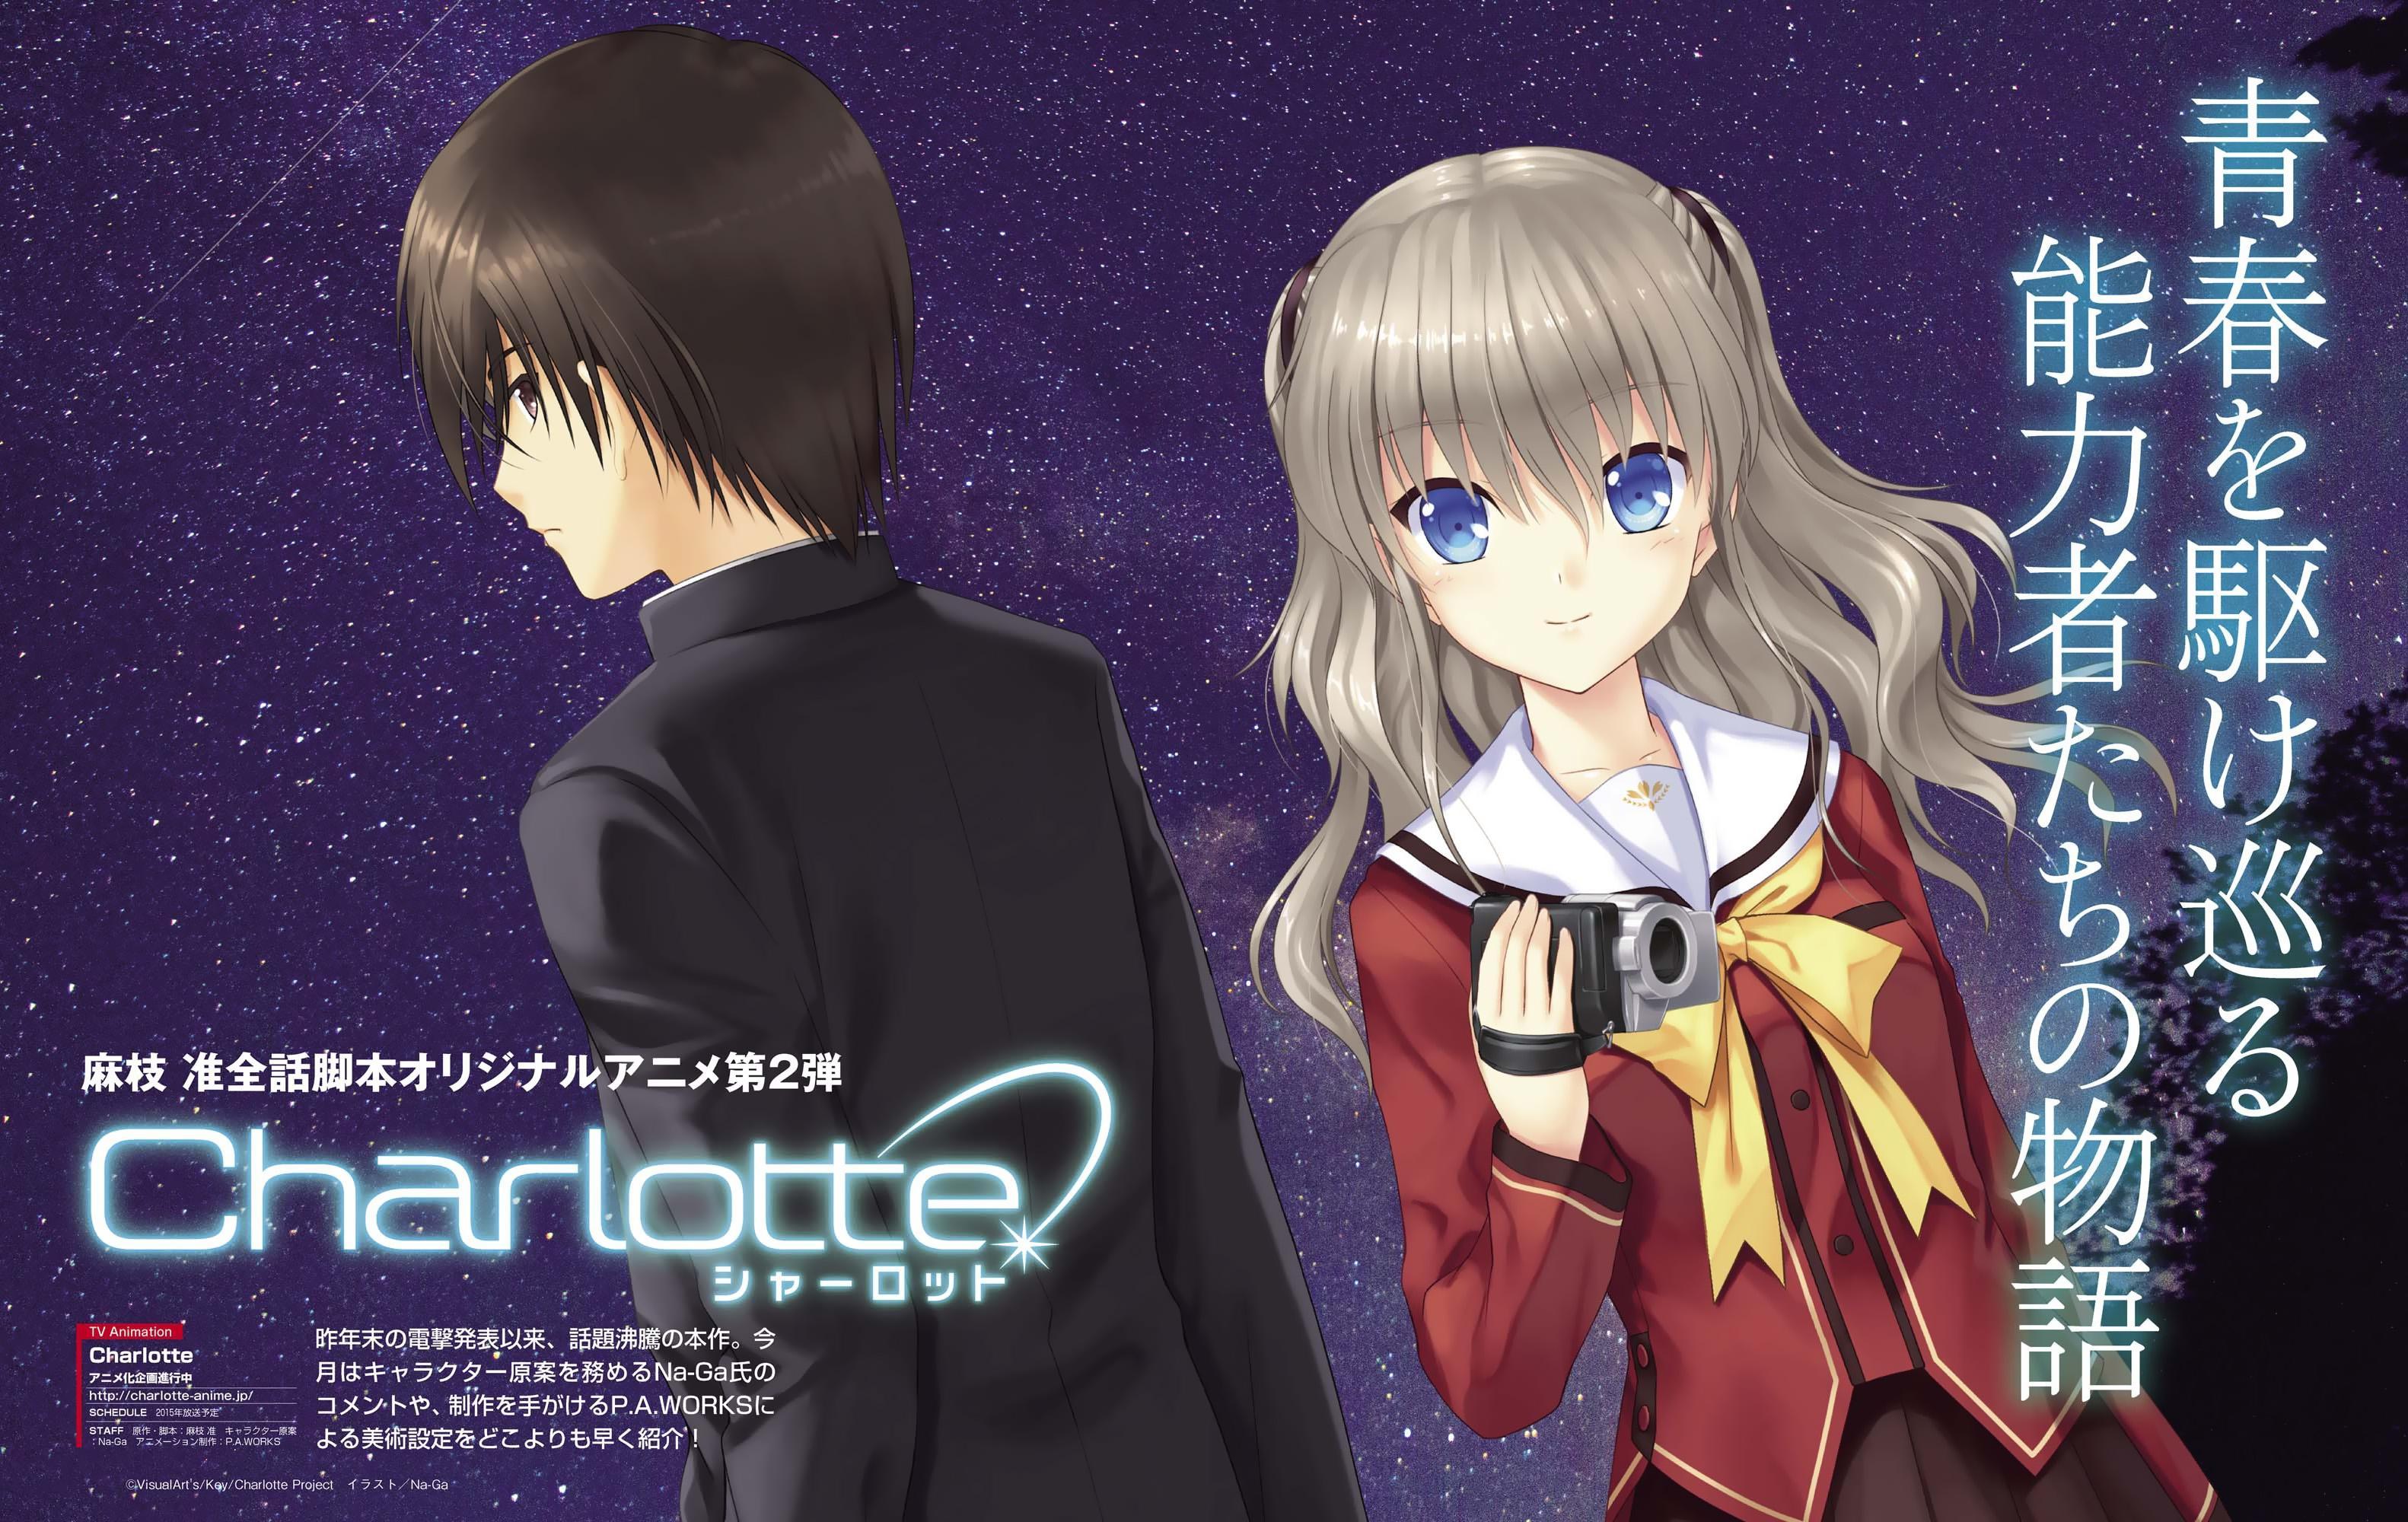 Charlotte Anime Wallpaper, image collections of wallpaper